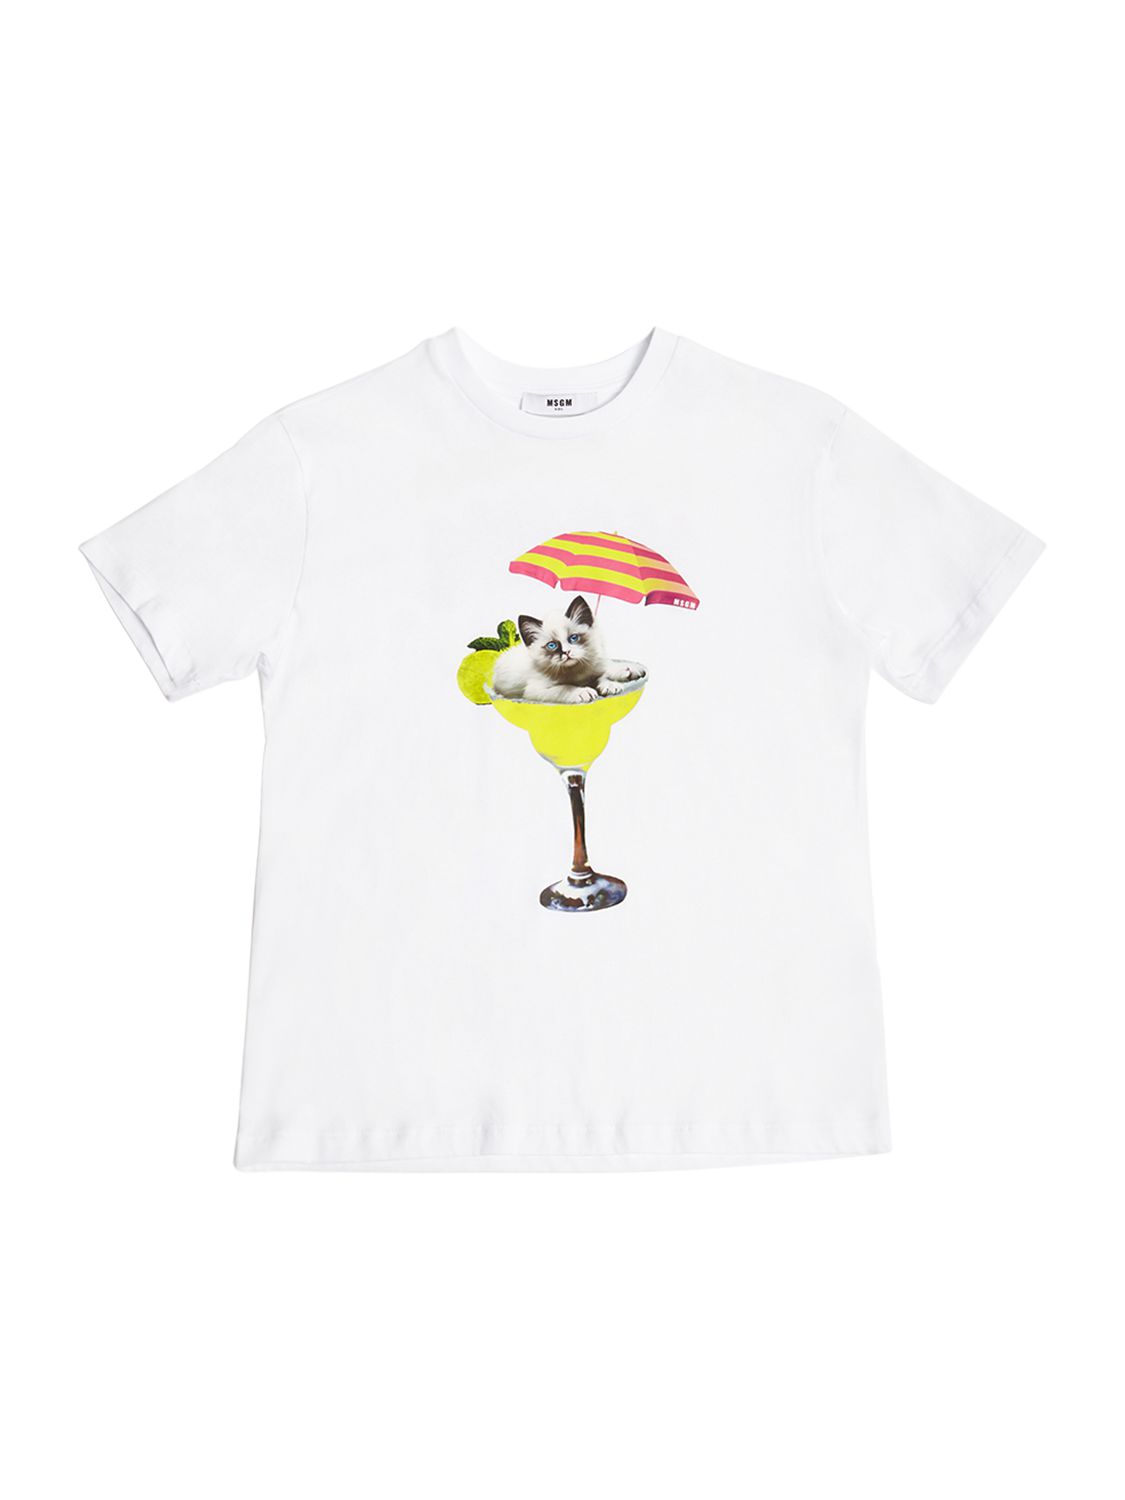 Msgm Kids' Cotton Jersey T-shirt In White